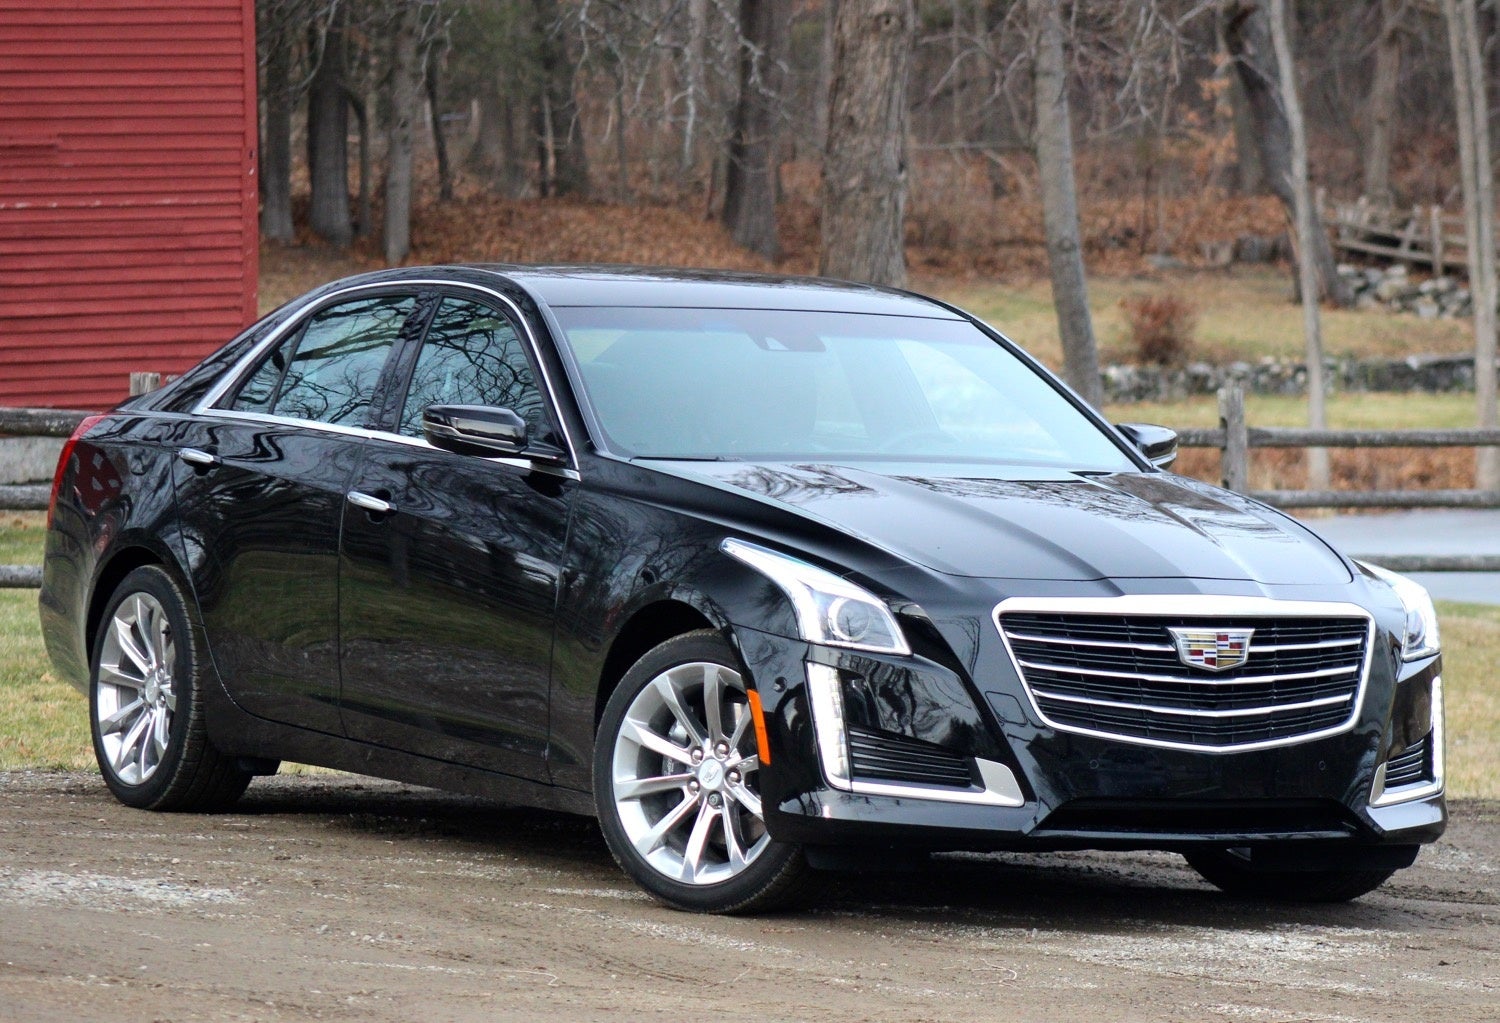 2016 Cadillac CTS - Test Drive Review - CarGurus